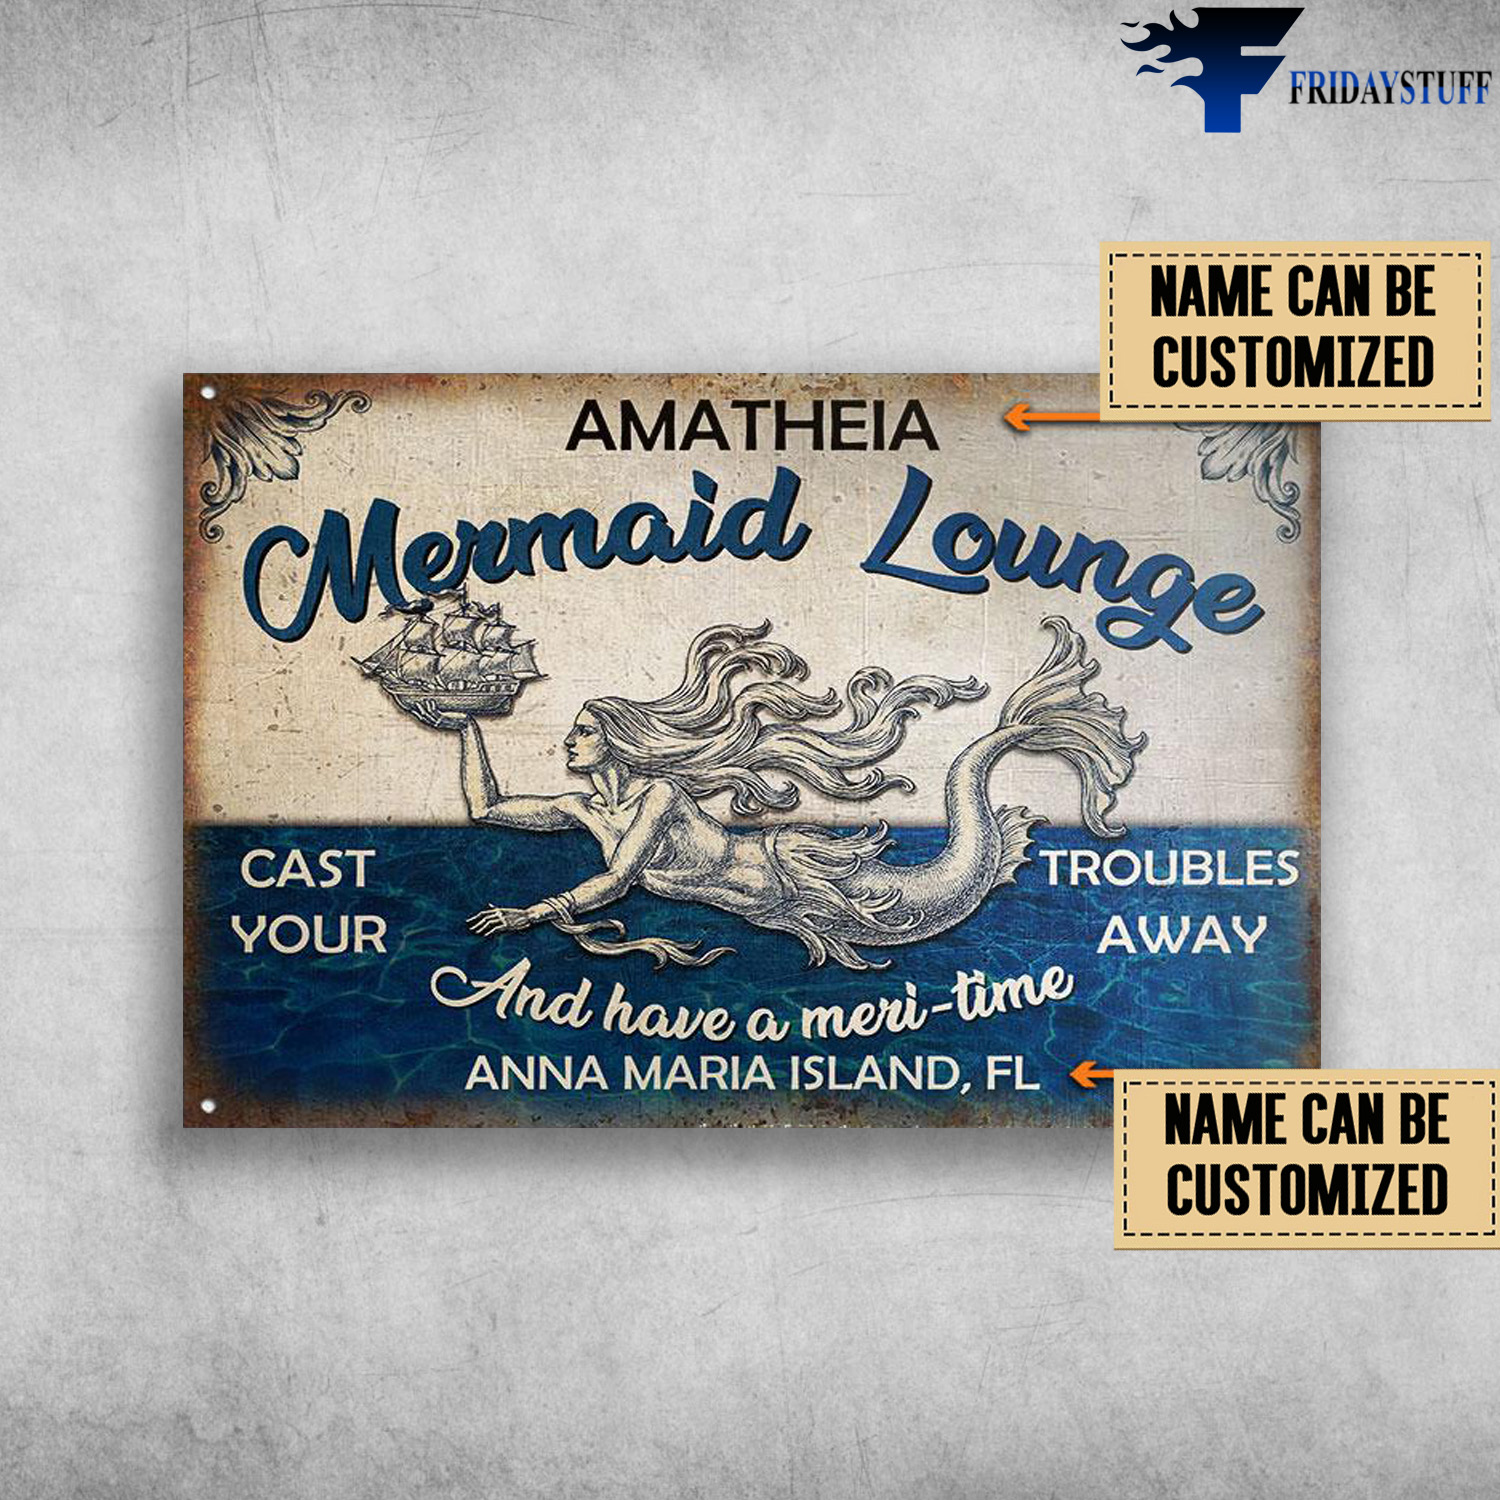 Mermaid Lounge, Cast Your Trouble Away, And Have A Meri-Time, Anna Maria Island, Fl